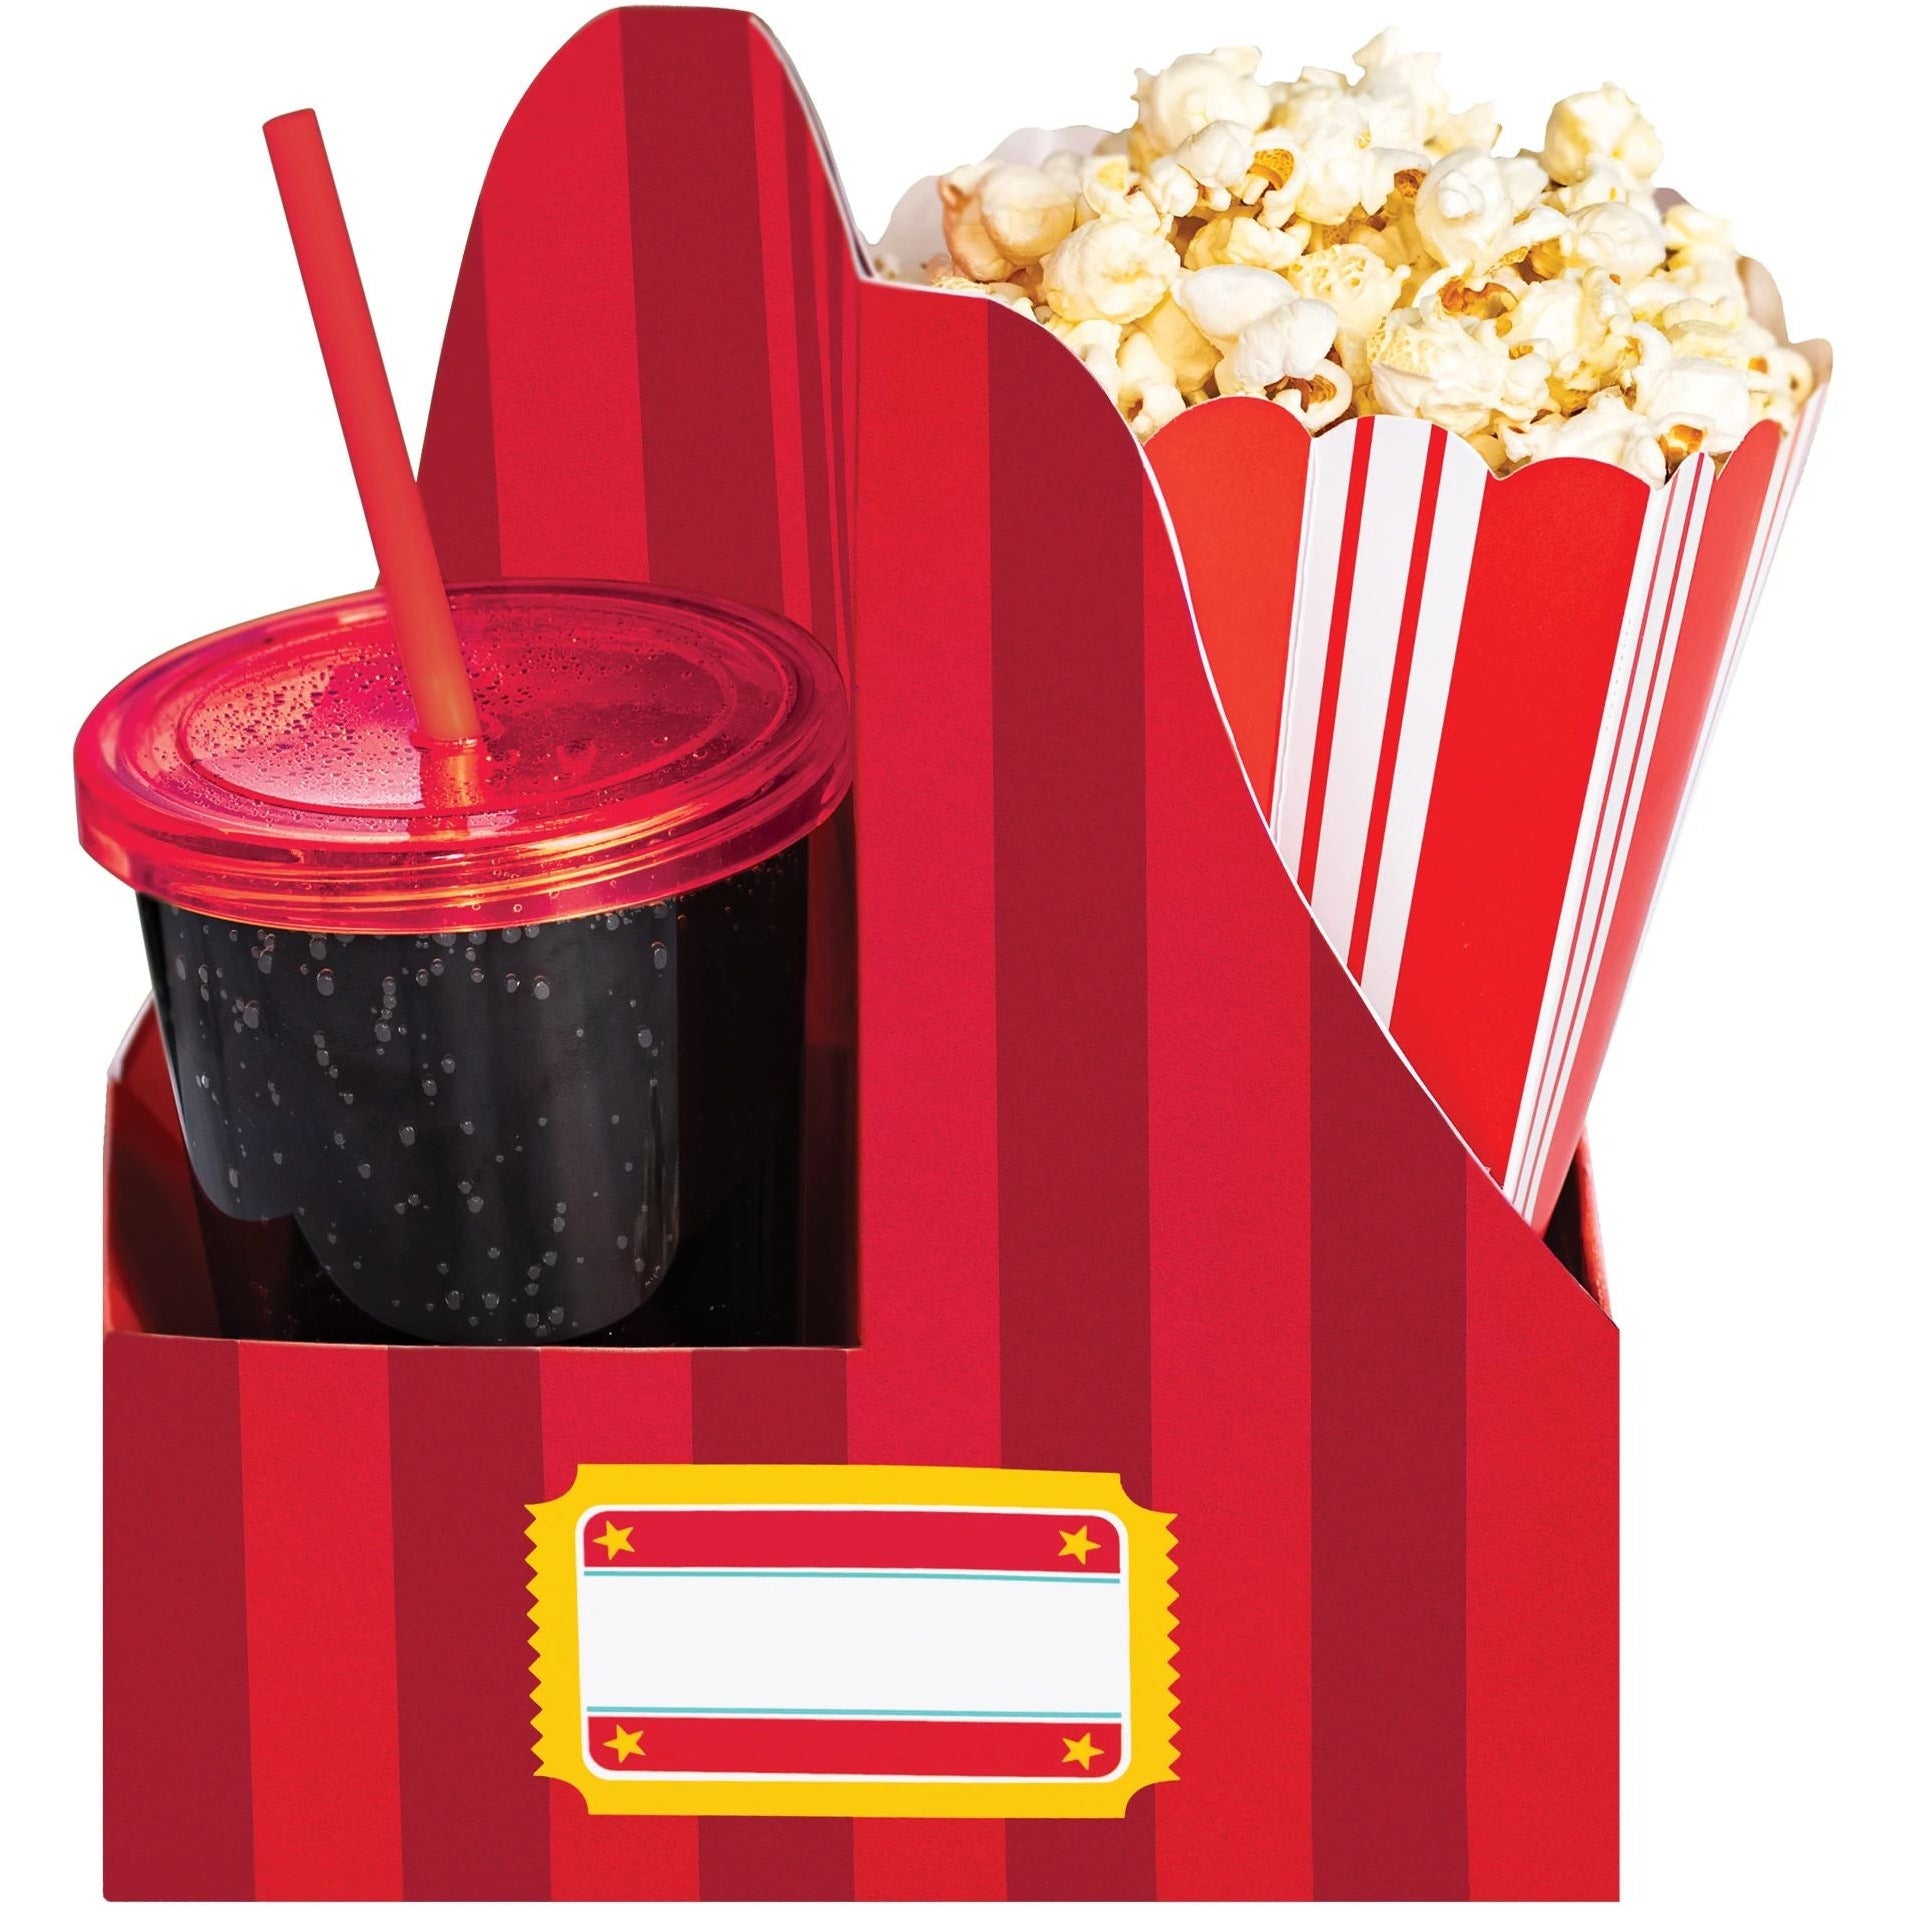 Amscan THEME: HOLLYWOOD Movie Night Snack Tray